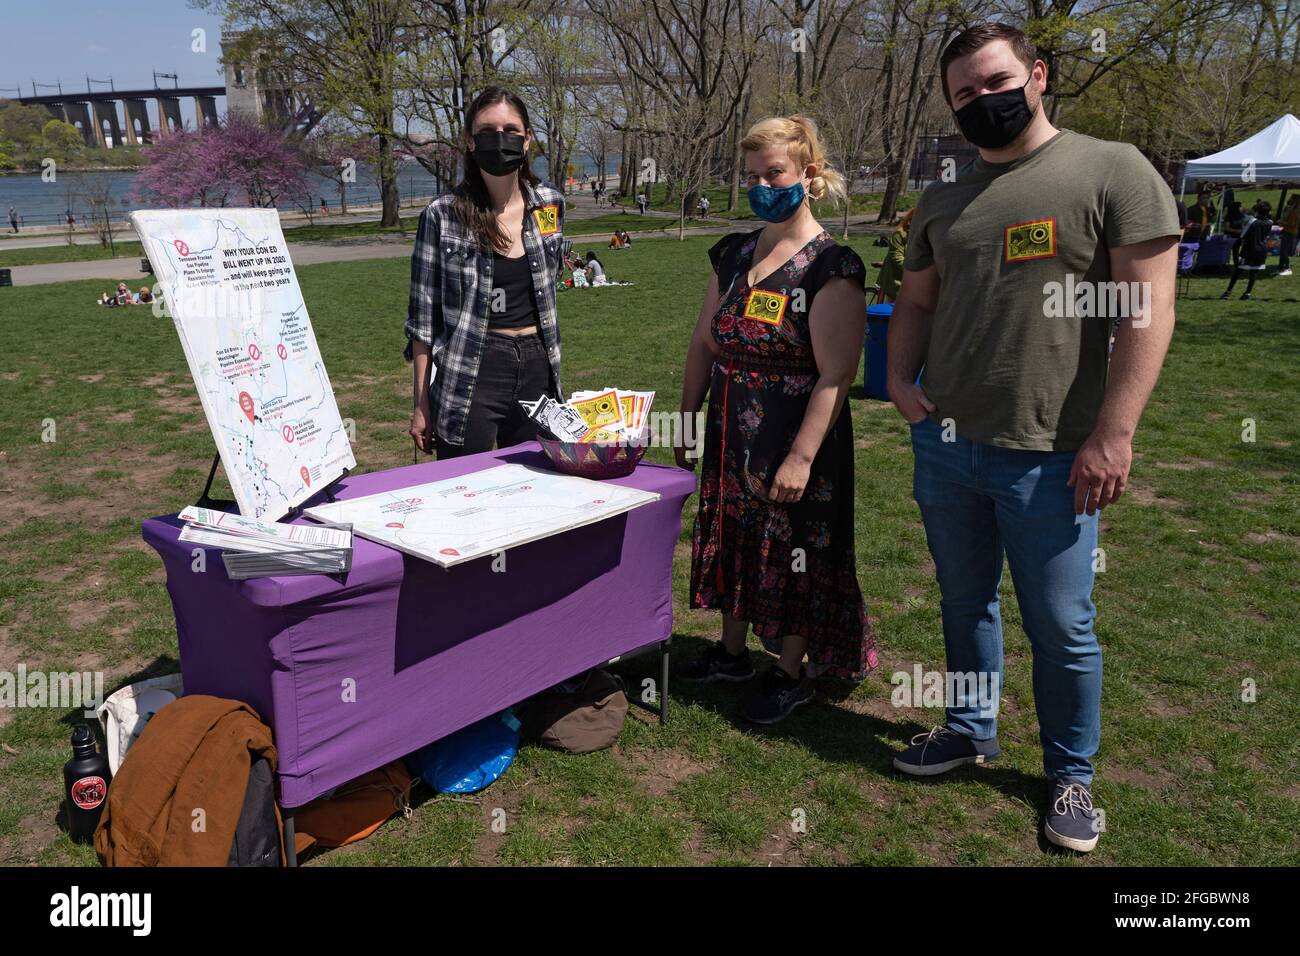 New York, United States. 24th Apr, 2021. Activists stand by the Sane Energy Project table during Earth Day Celebration in Astoria Park of the Queens borough of New York City.Congresswoman Ocasio-Cortez joined by New York State Senator Jessica Ramos and New York Assembly Member Zohran Mamdani for remarks about the NRG Energy, Inc proposal for the Astoria power plant. The Congresswoman opposes NRG's effort to replace their 50-year old turbine at the Astoria 'peaker' plant with a generator that burns fossil fuels extracted by fracking. Credit: SOPA Images Limited/Alamy Live News Stock Photo